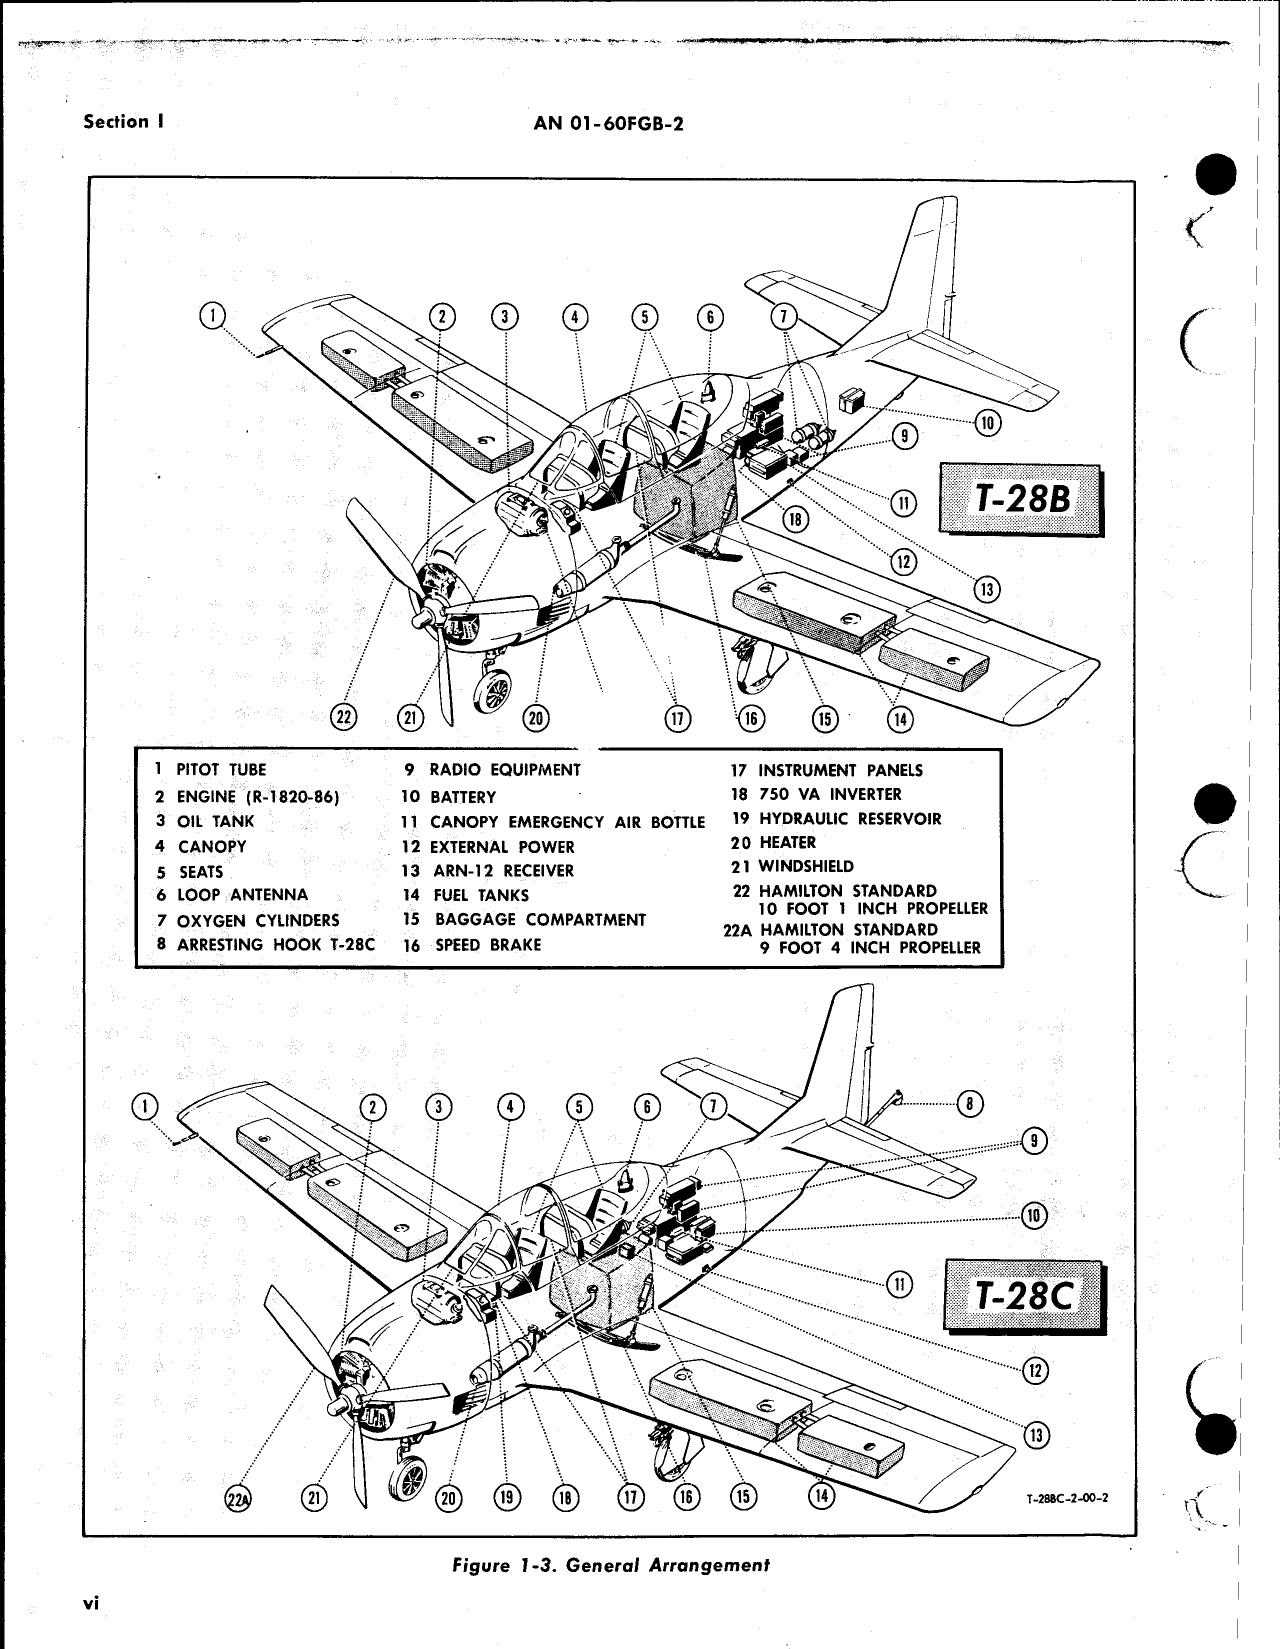 Sample page  8 from AirCorps Library document: Handbook Maintenance Instructions, T-28B T-28C